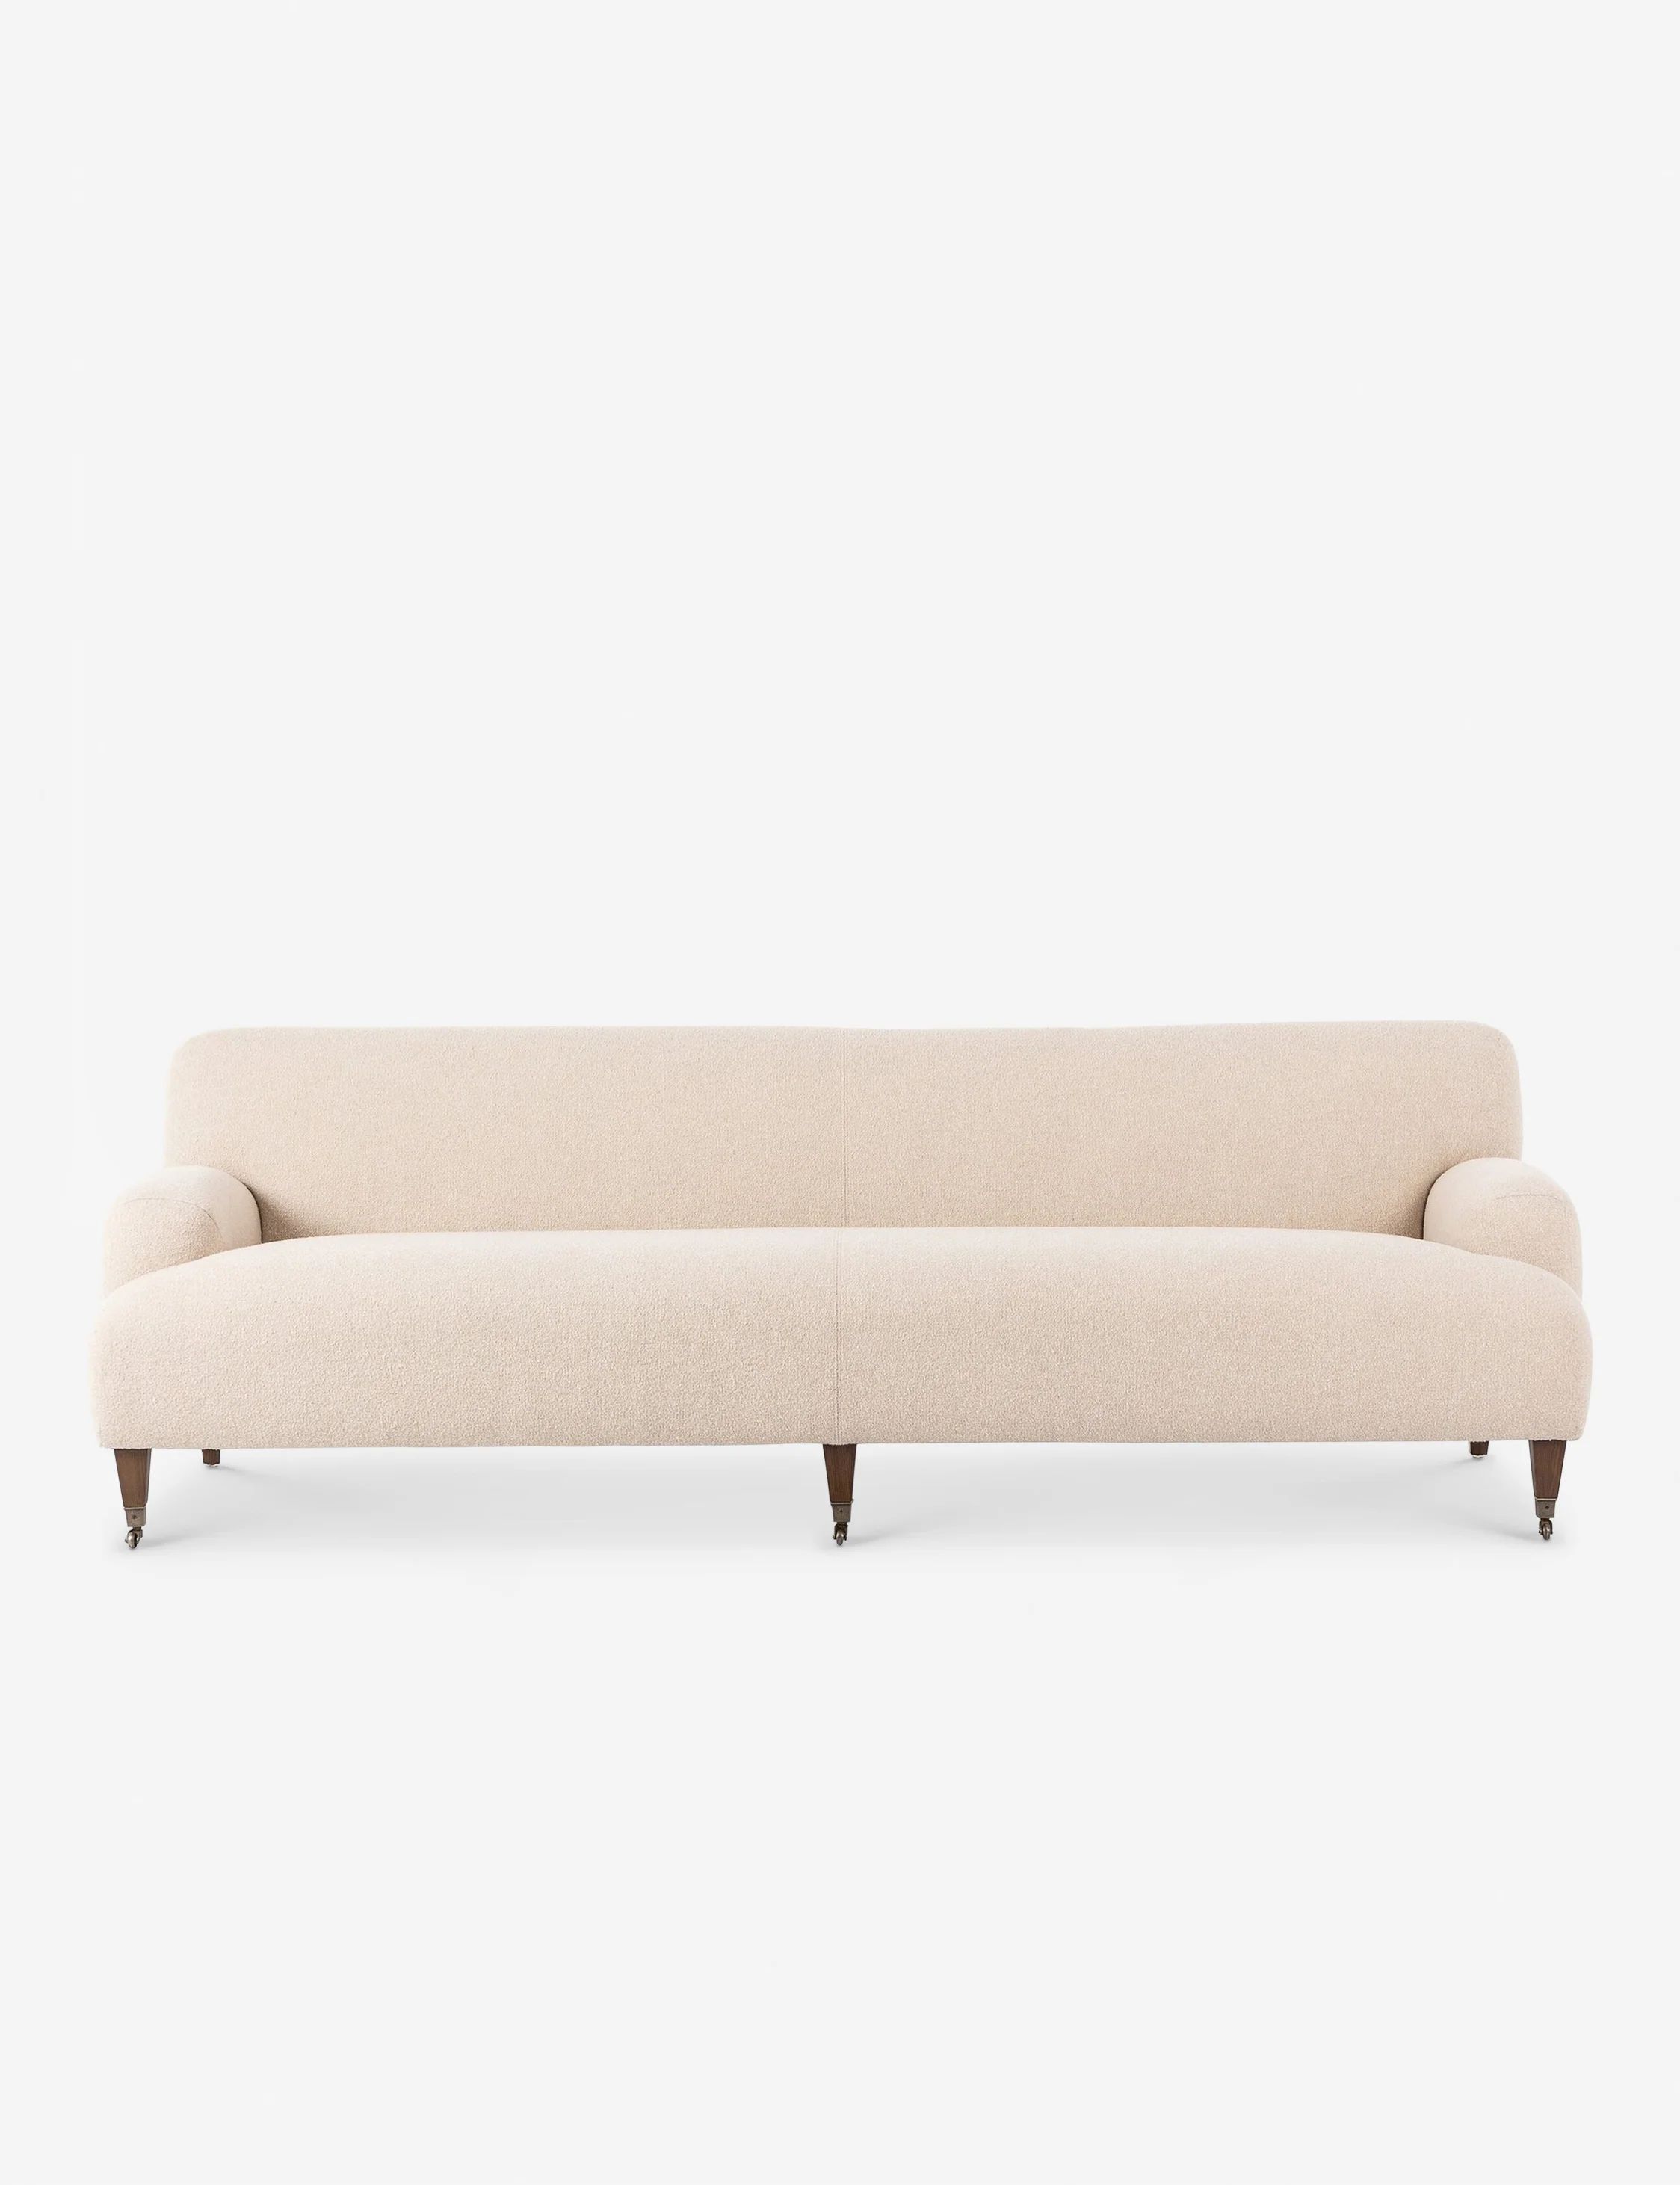 Kent Sofa by Amber Lewis x Four Hands | Lulu and Georgia 